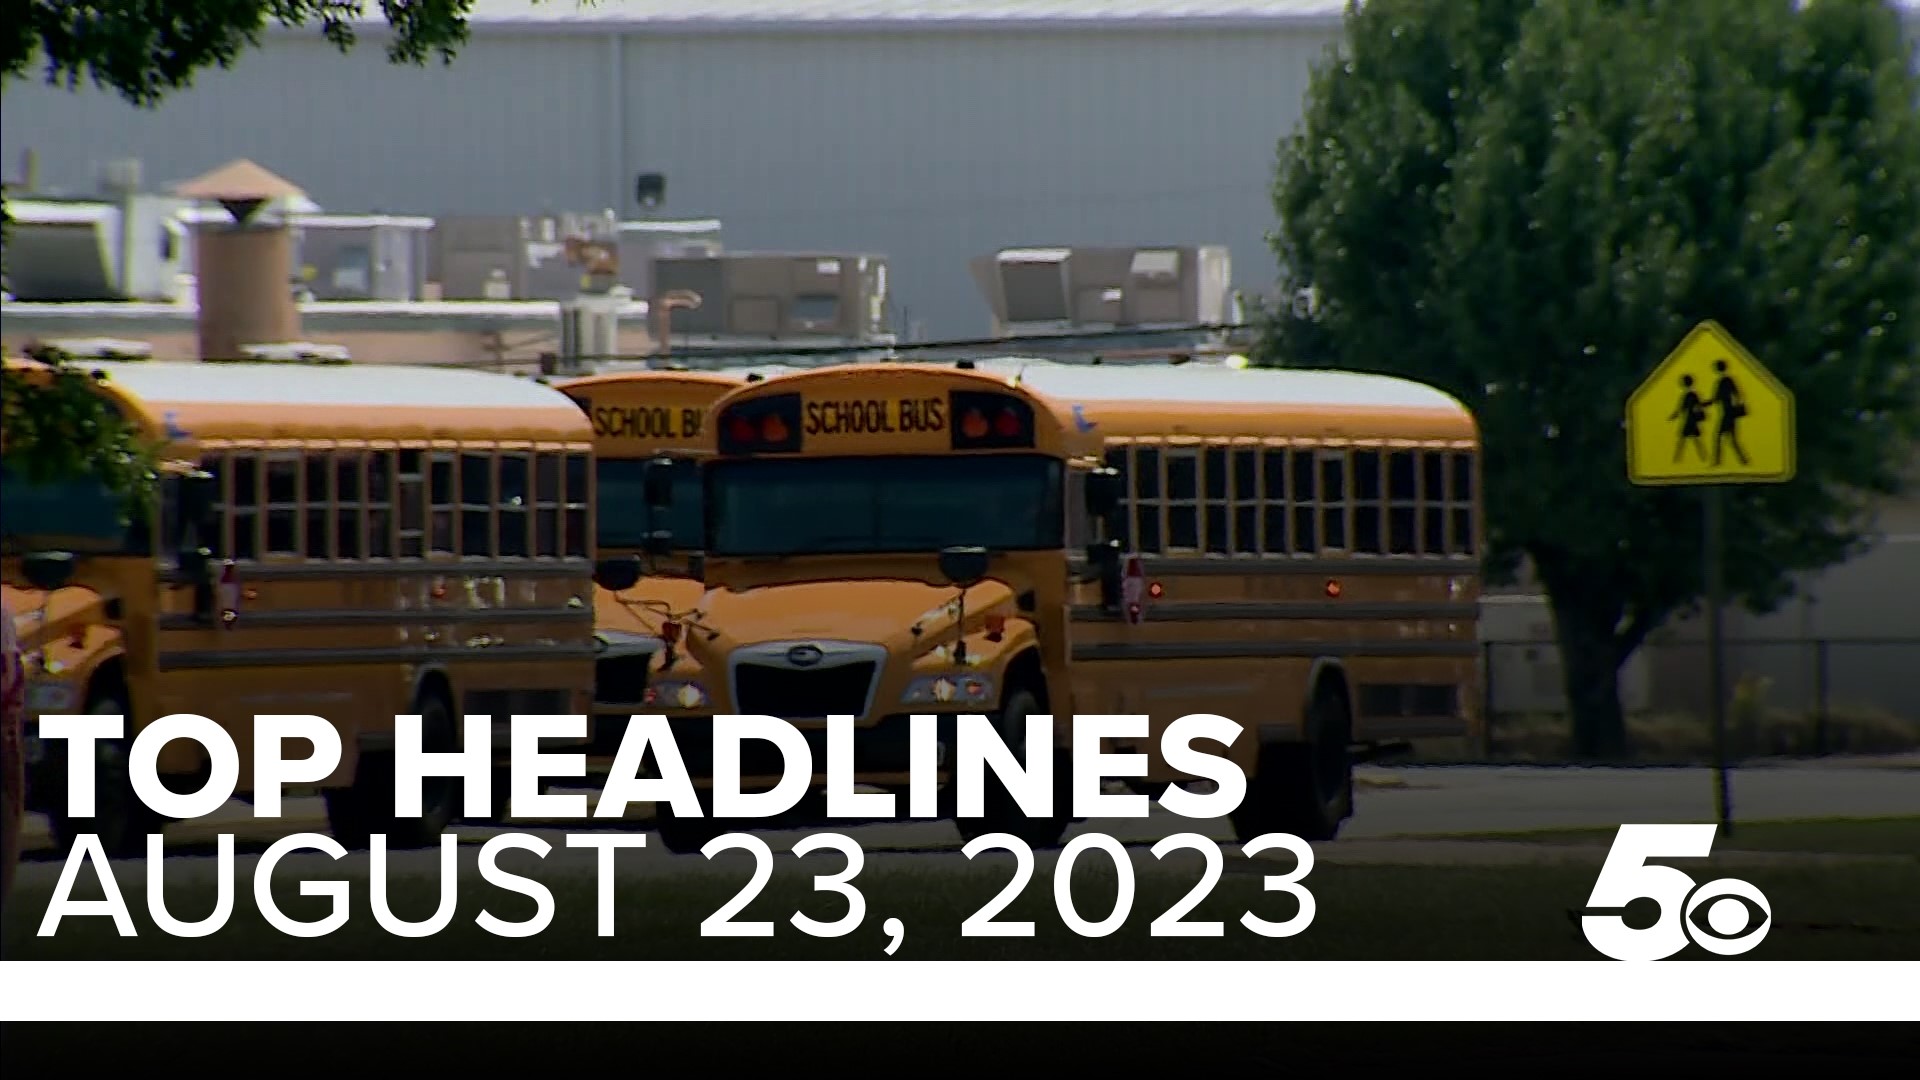 Top headlines for Northwest Arkansas and the River Valley for August 23, 2023.